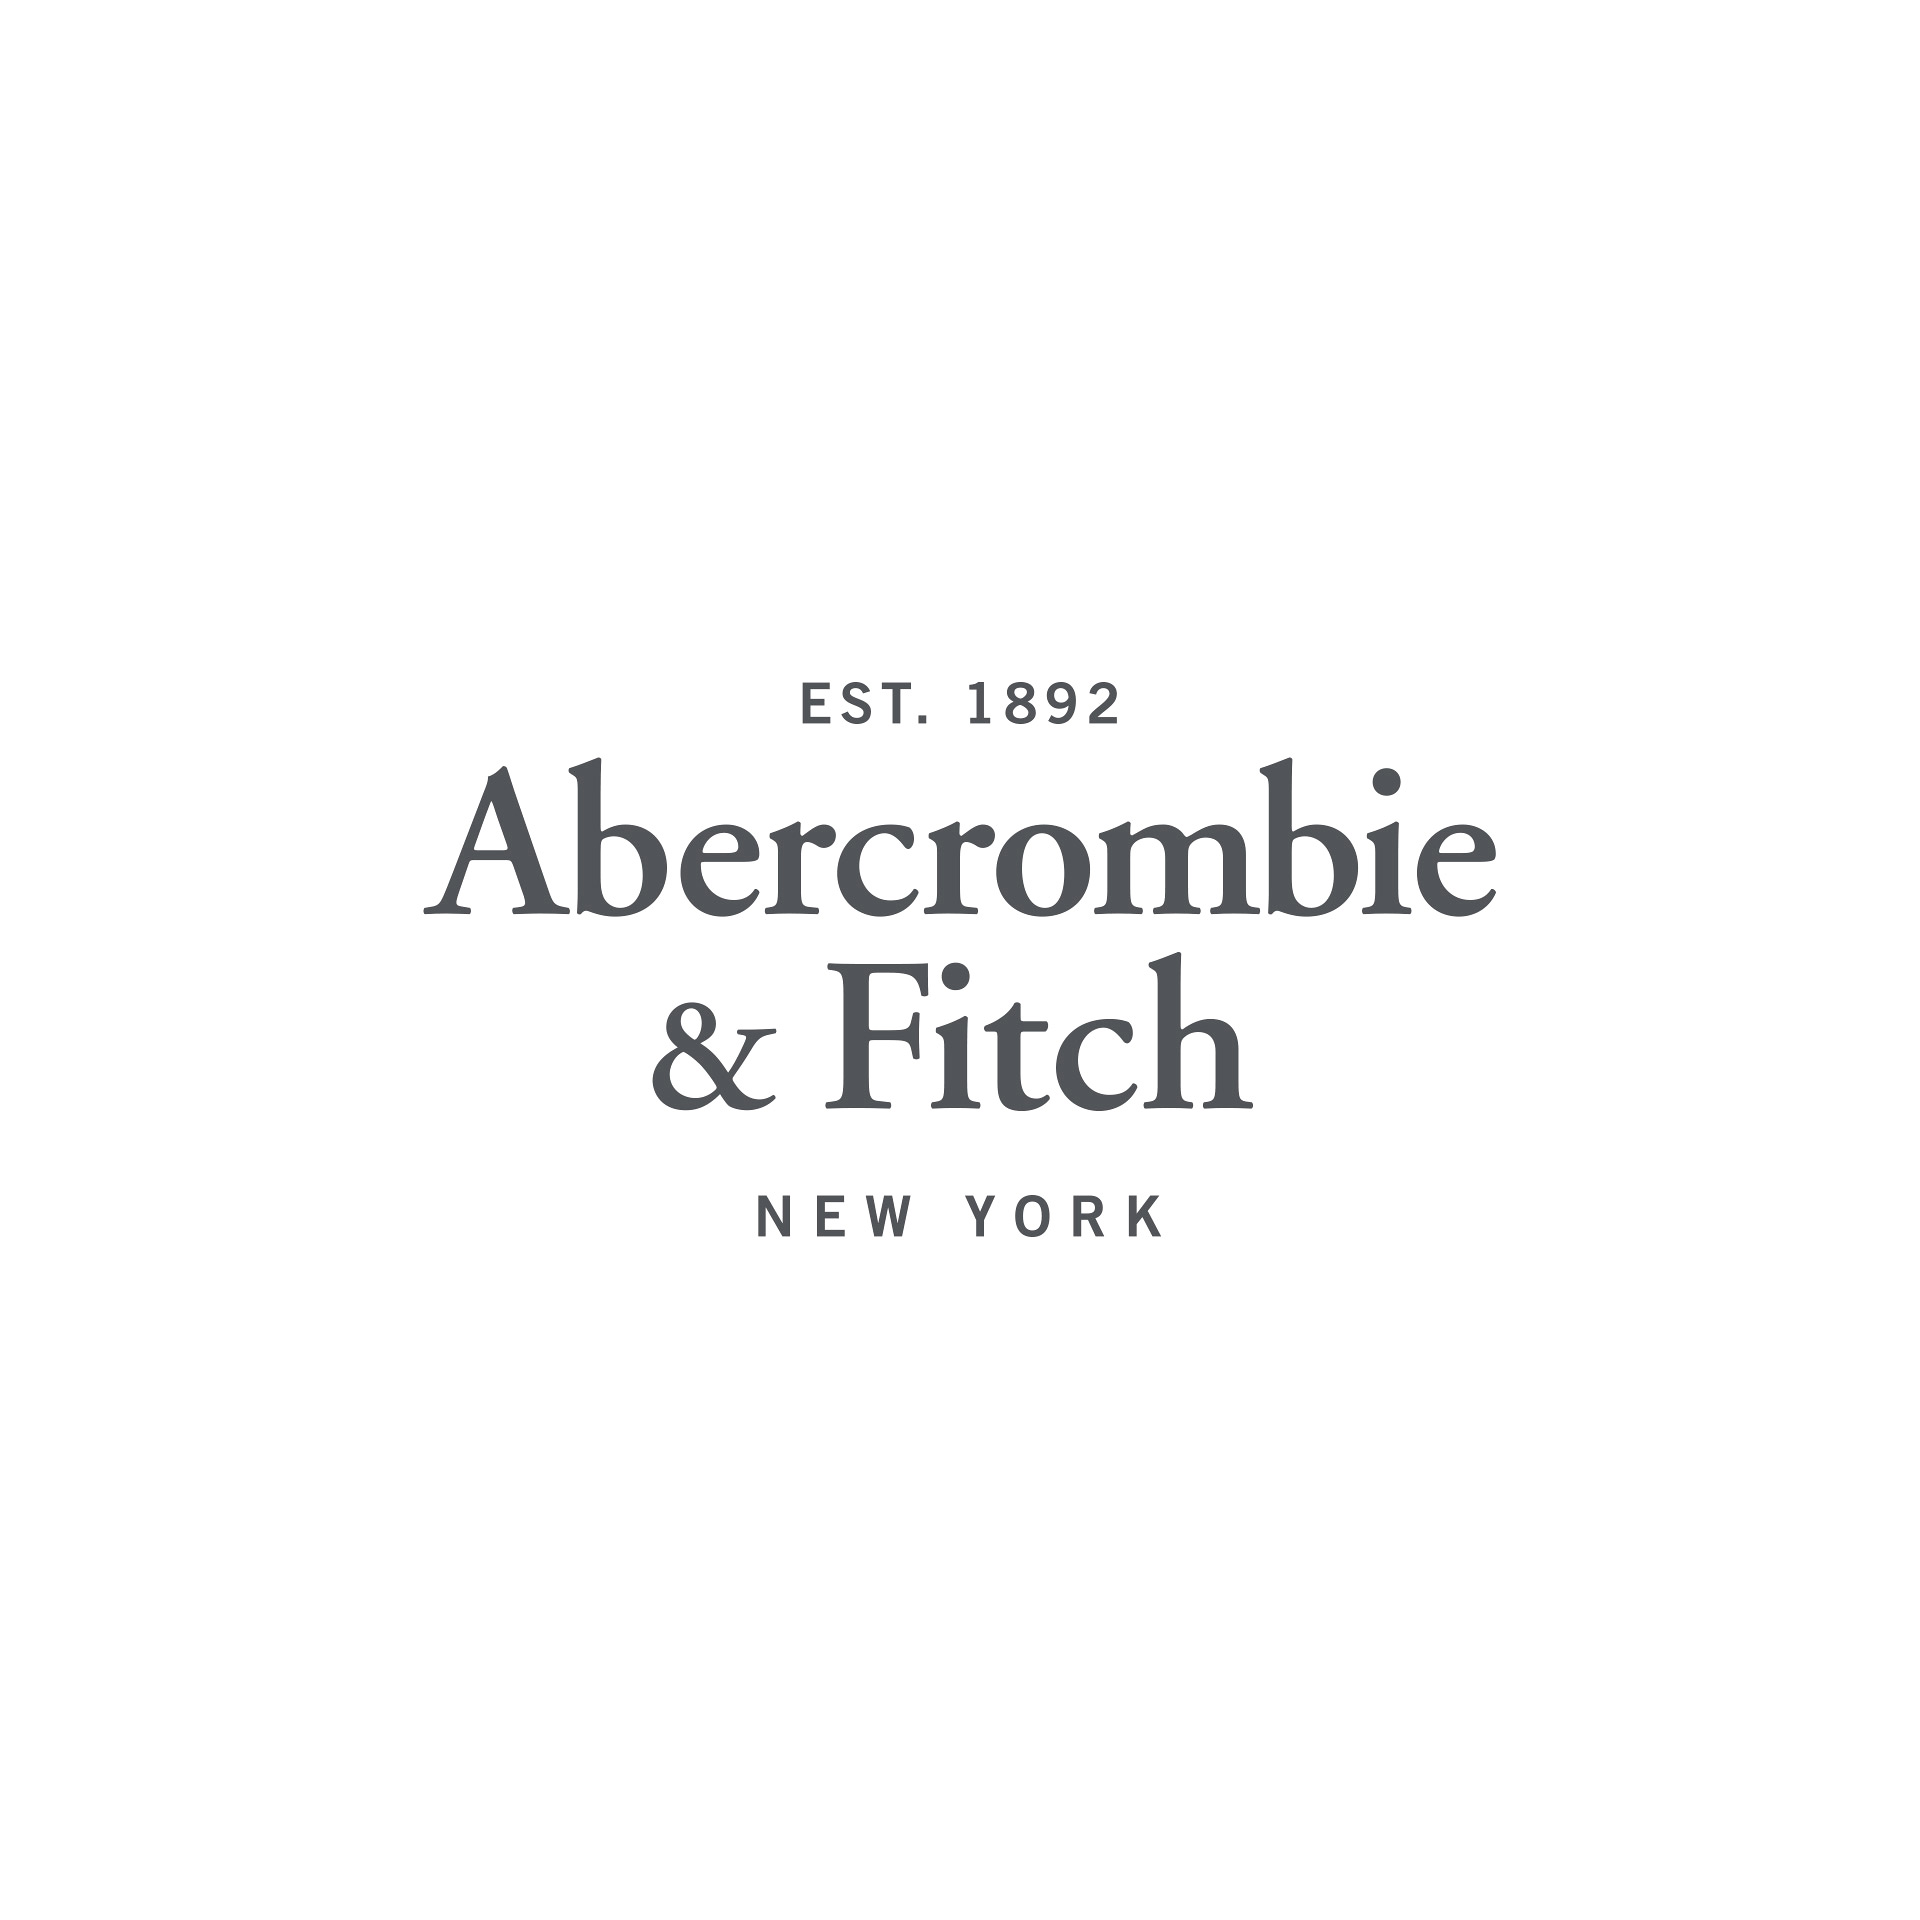 abercrombie & fitch customer service number